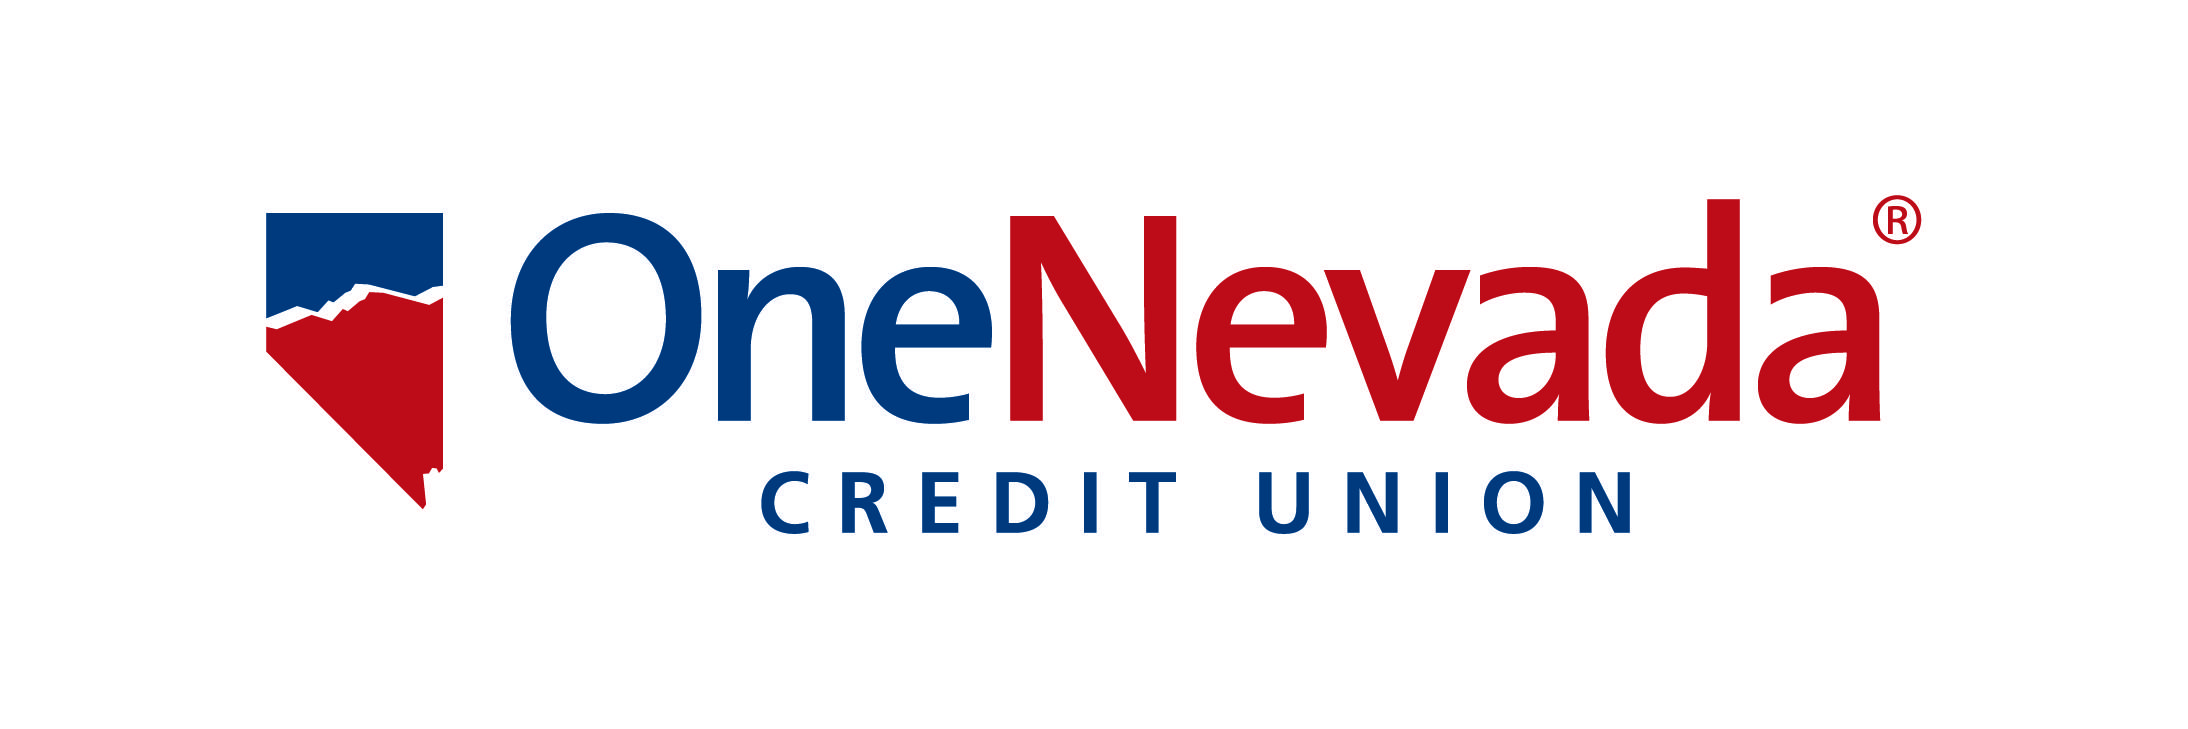 2 Color Logo - Graphic Identity Guidelines. One Nevada Credit Union